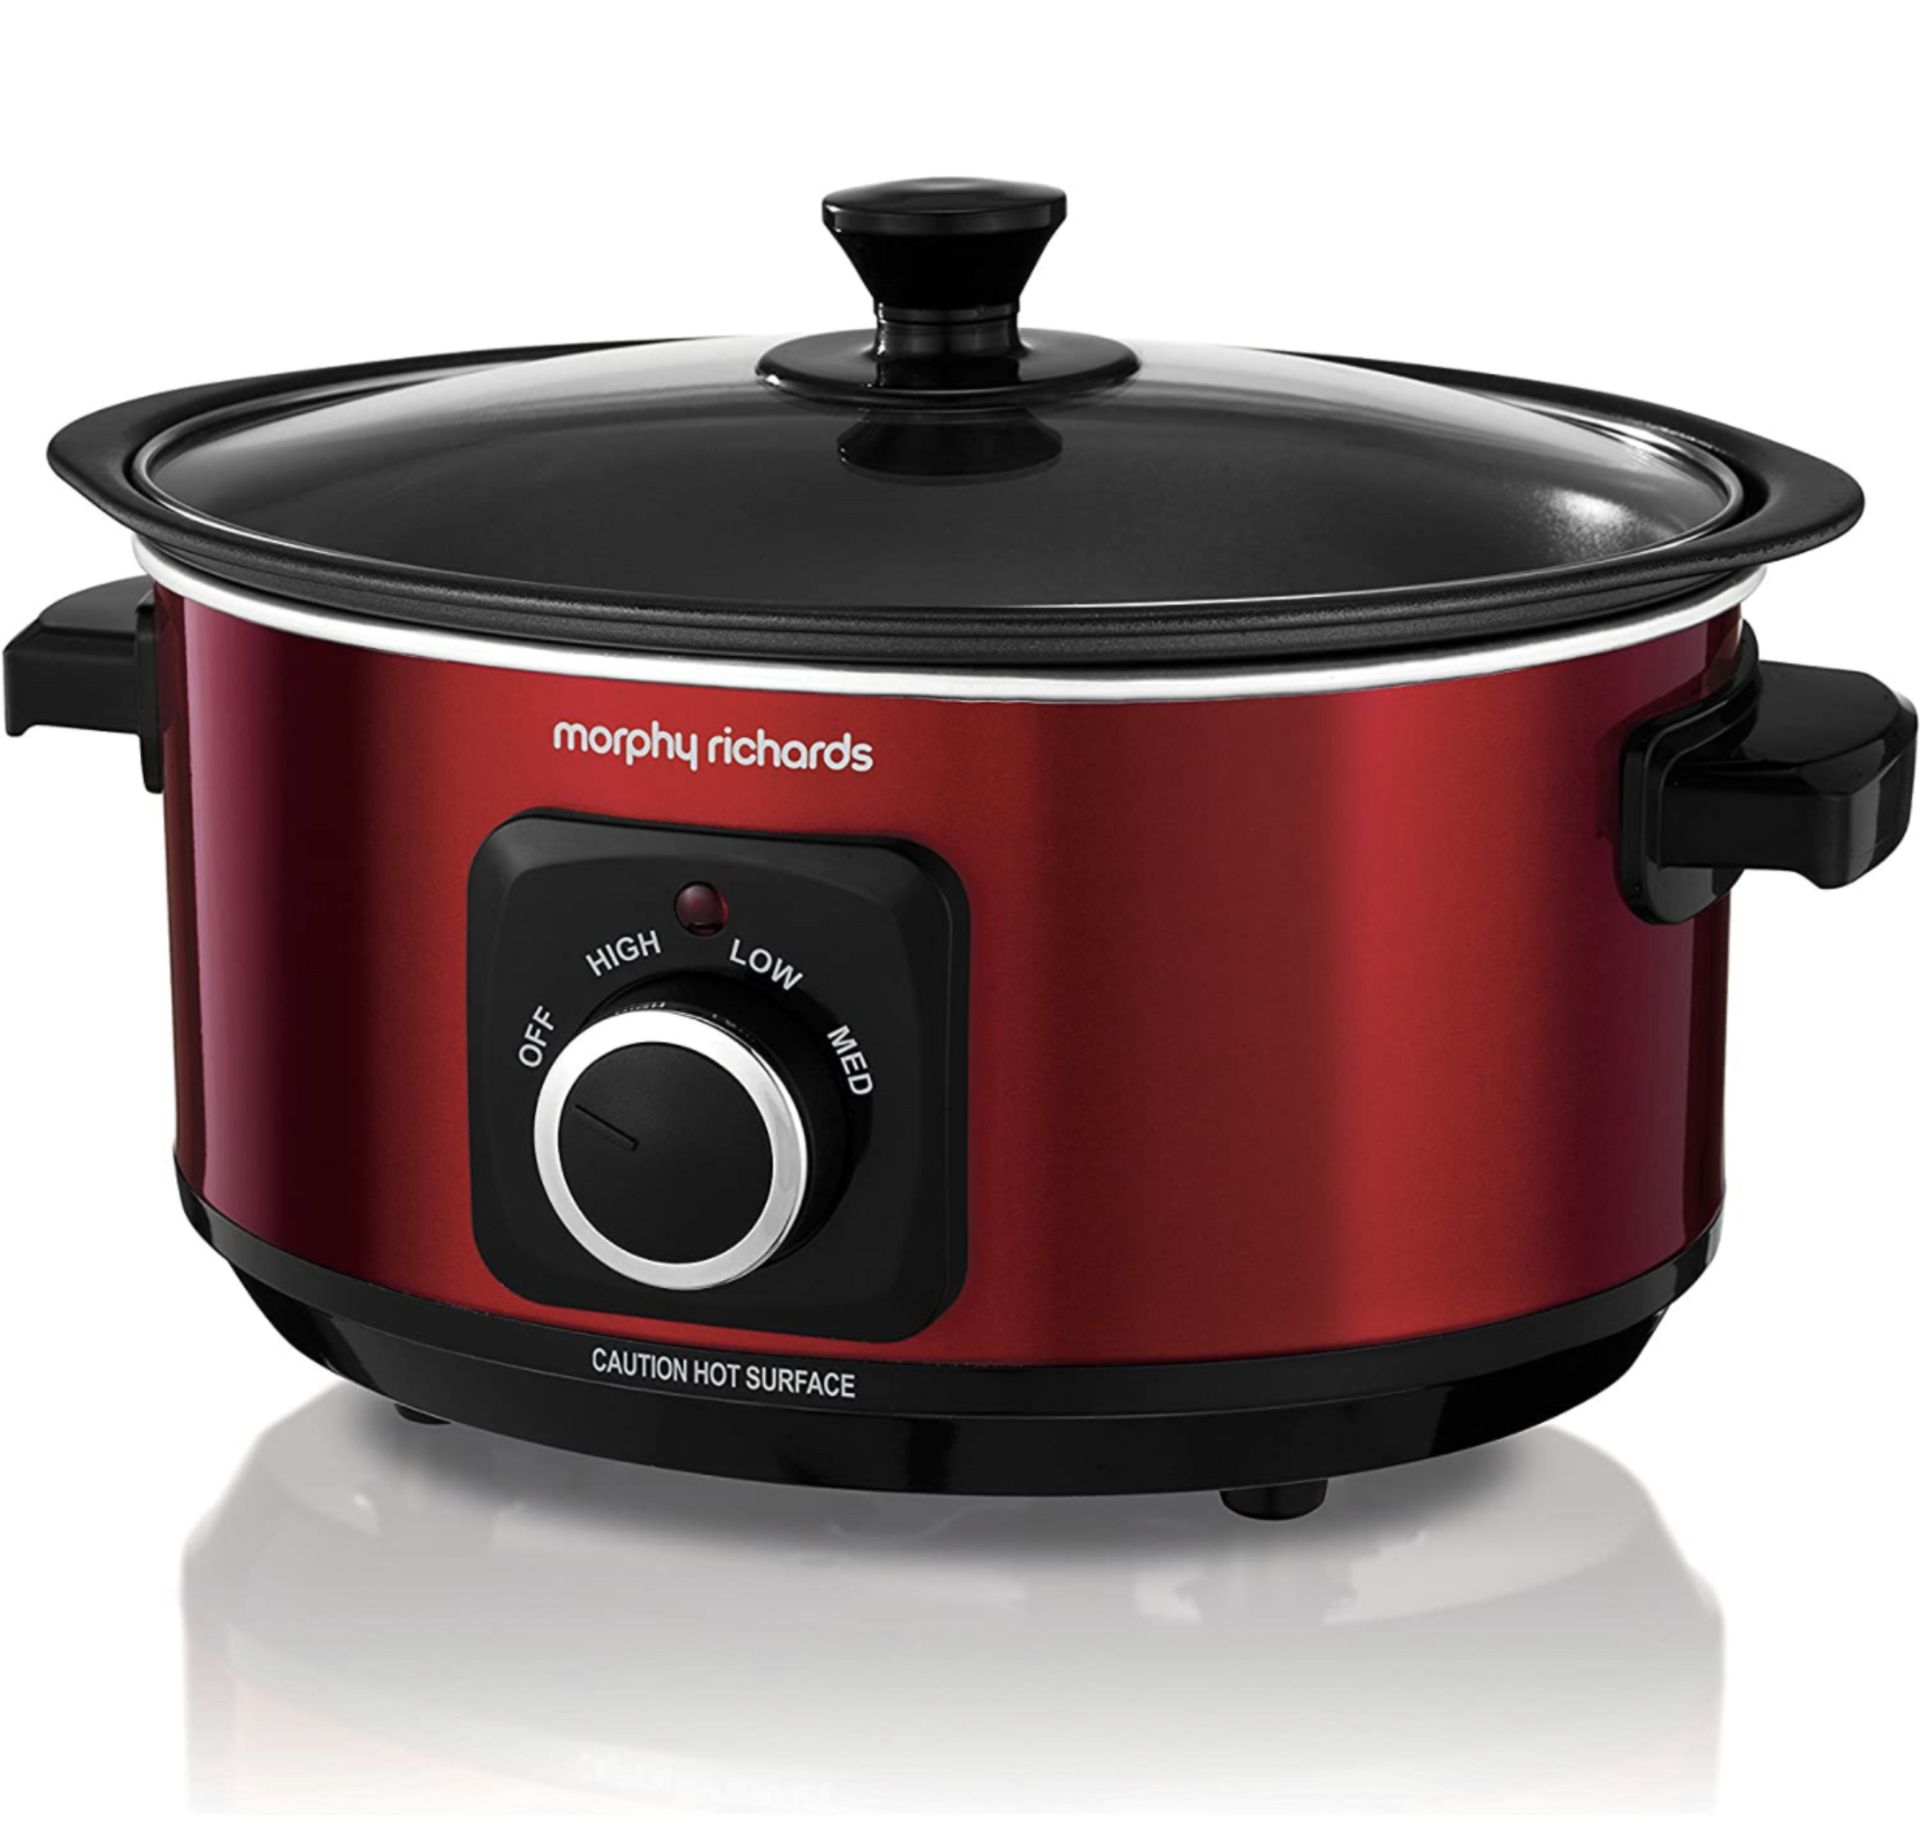 RRP £47.99 Morphy Richards 460014 Slow Cooker Sear and Stew 3.5L Red Slowcooker